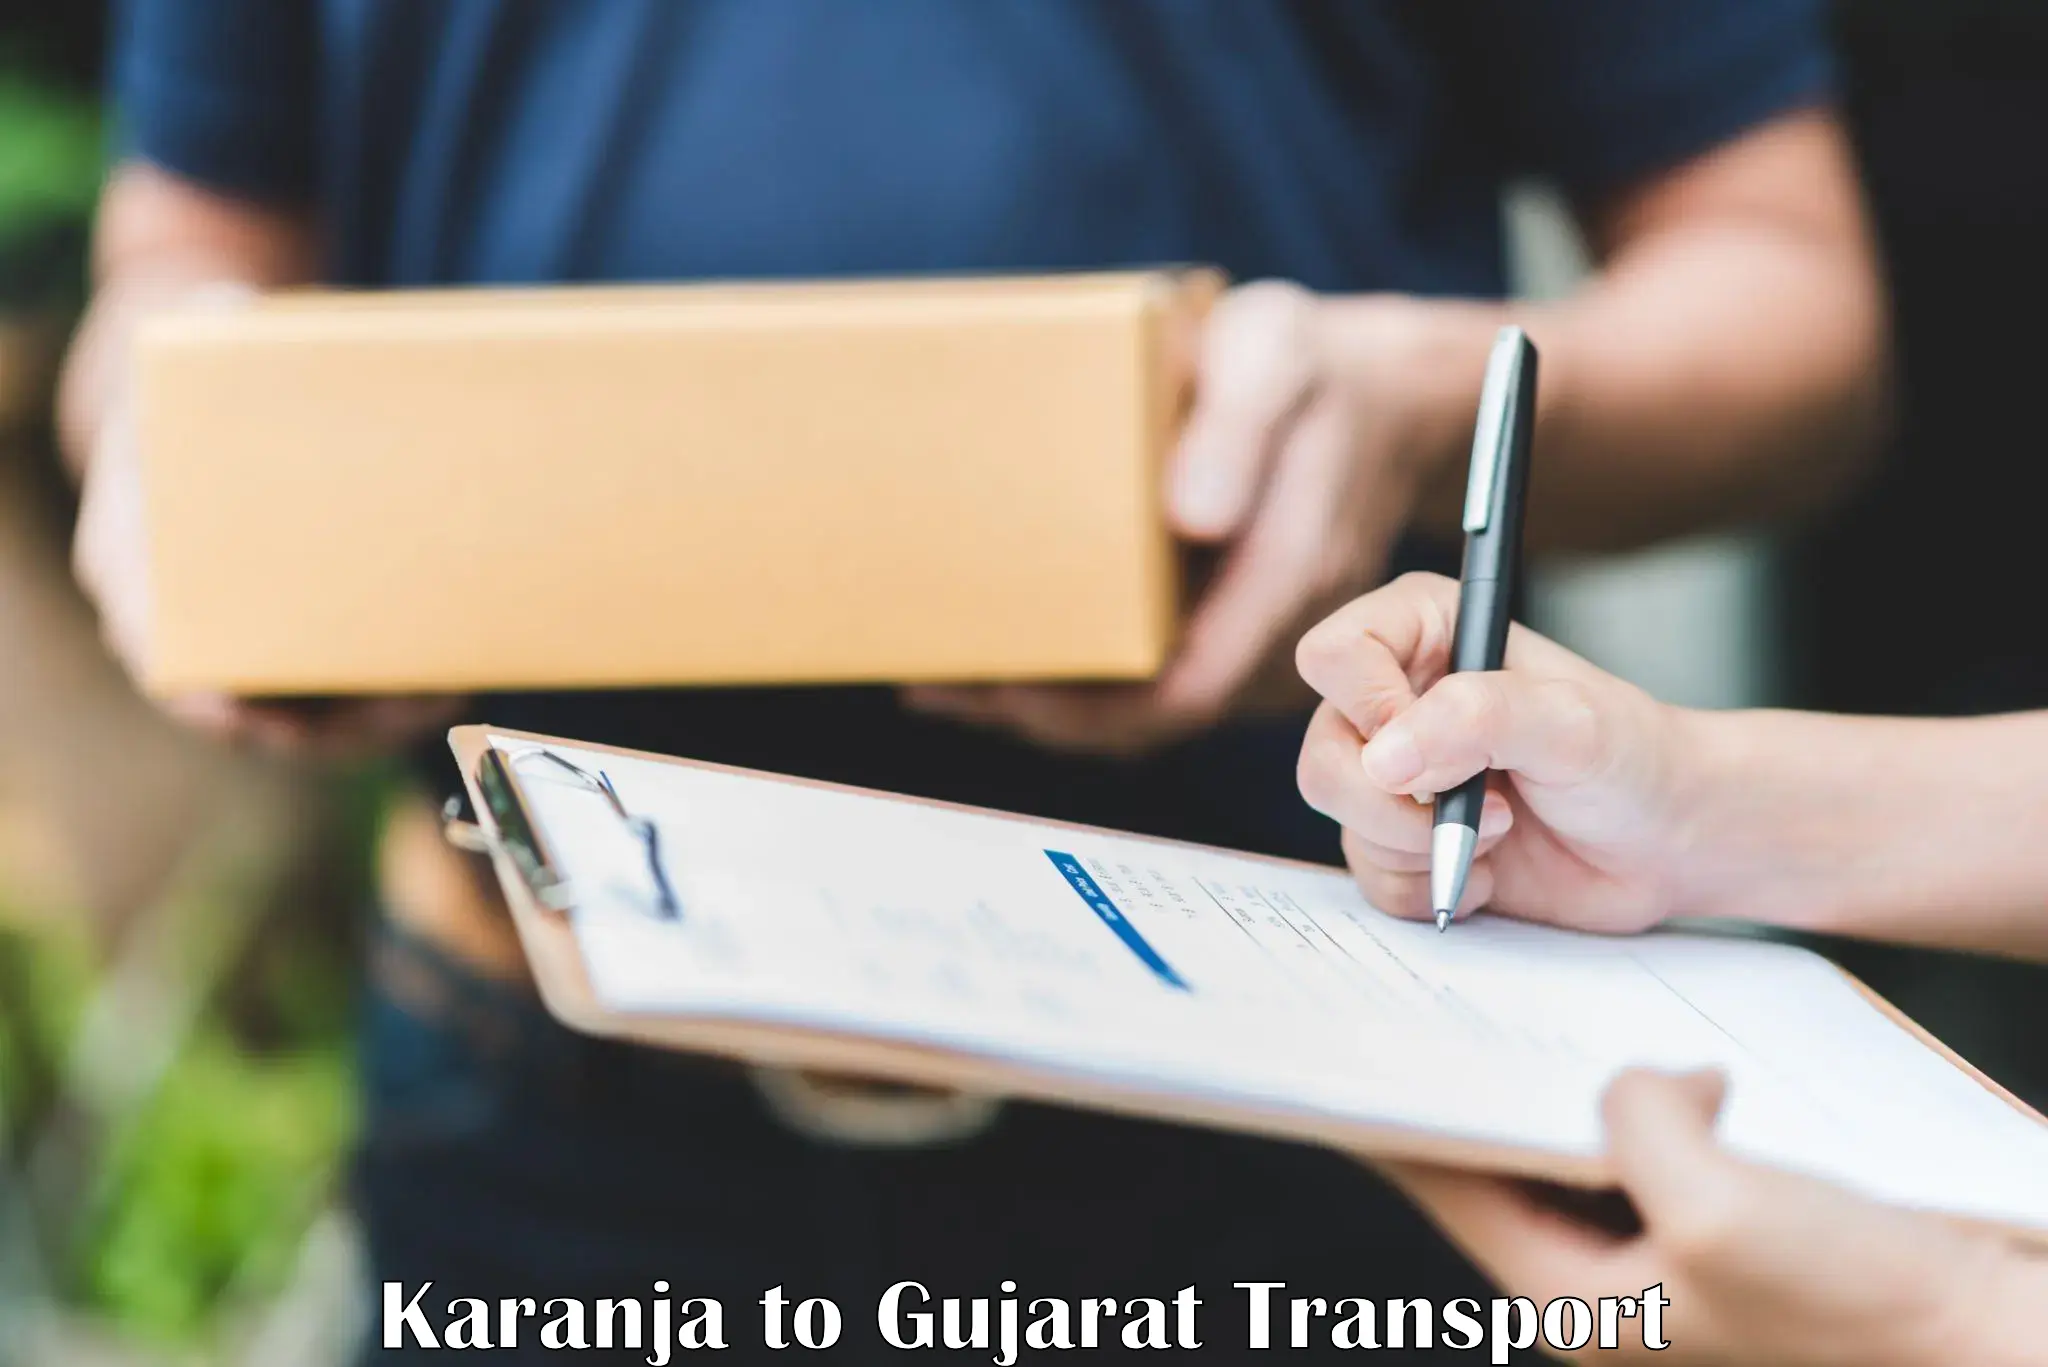 Transport bike from one state to another Karanja to Gujarat